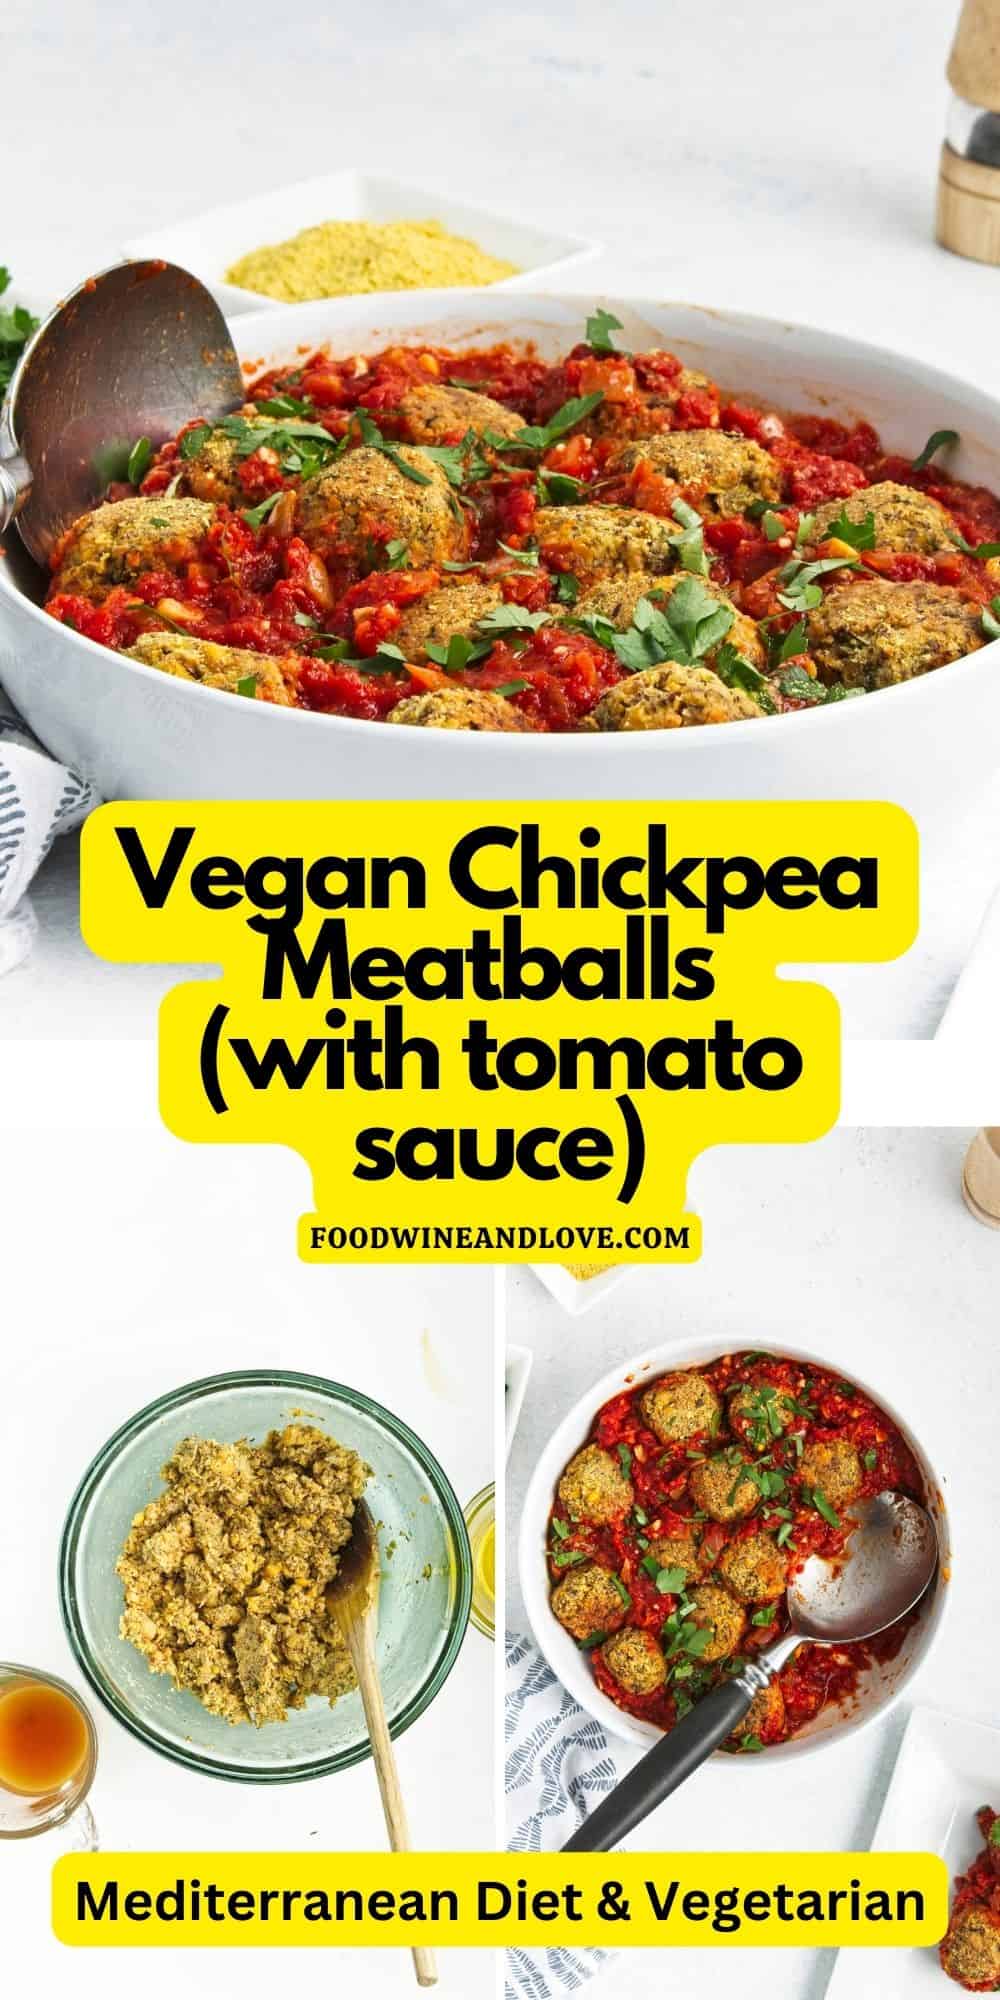 Vegan Chickpea Meatballs (with tomato sauce),  a delicious and nutritious plant-based option to meat-based meatballs.  vegetarian, vegan